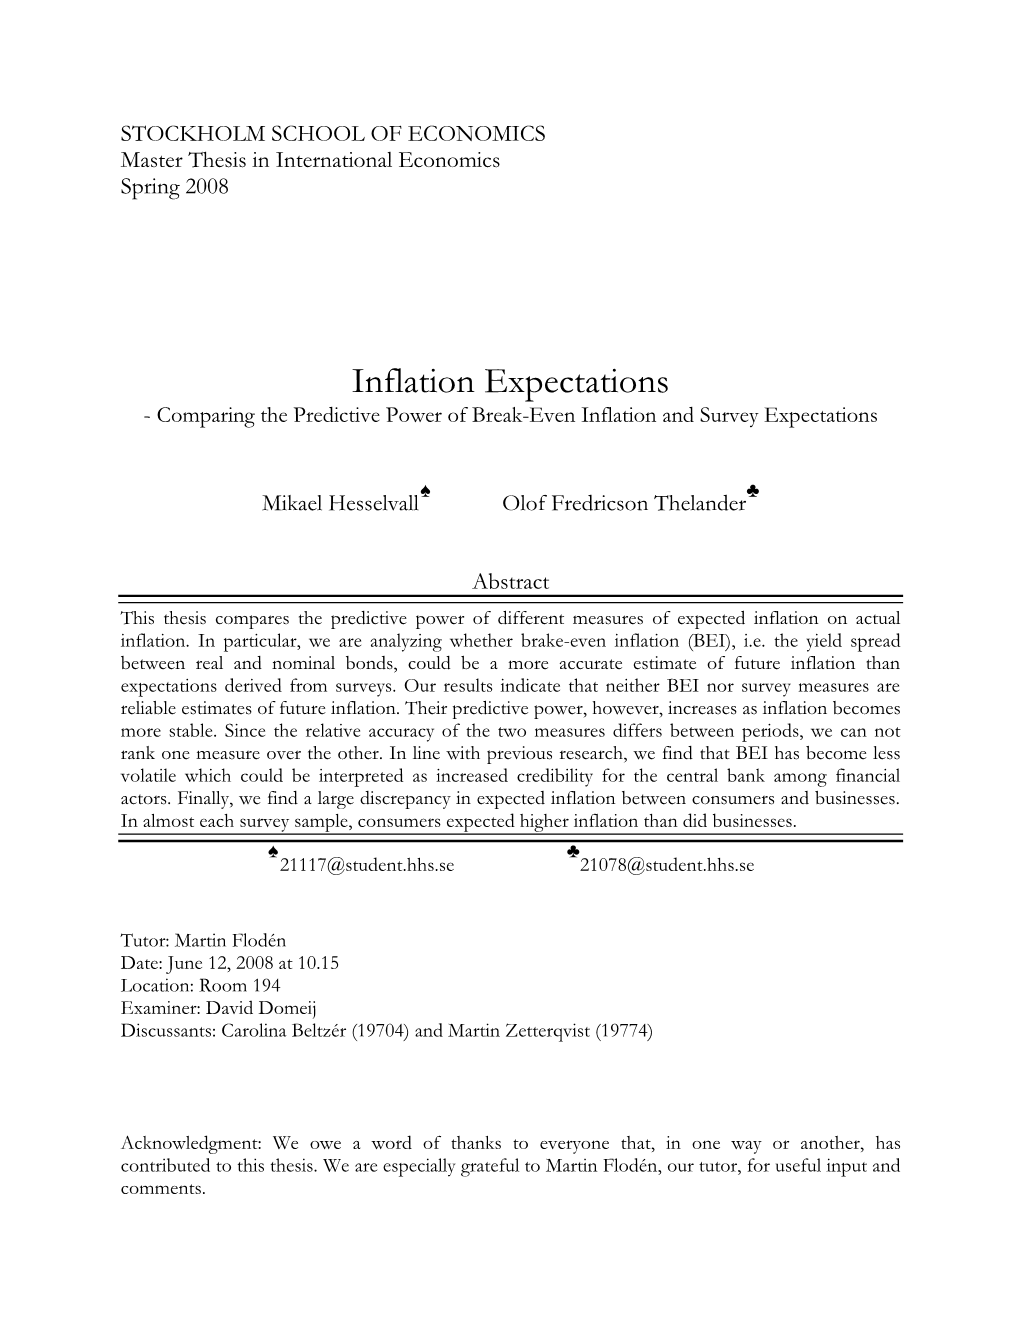 Inflation Expectations - Comparing the Predictive Power of Break-Even Inflation and Survey Expectations